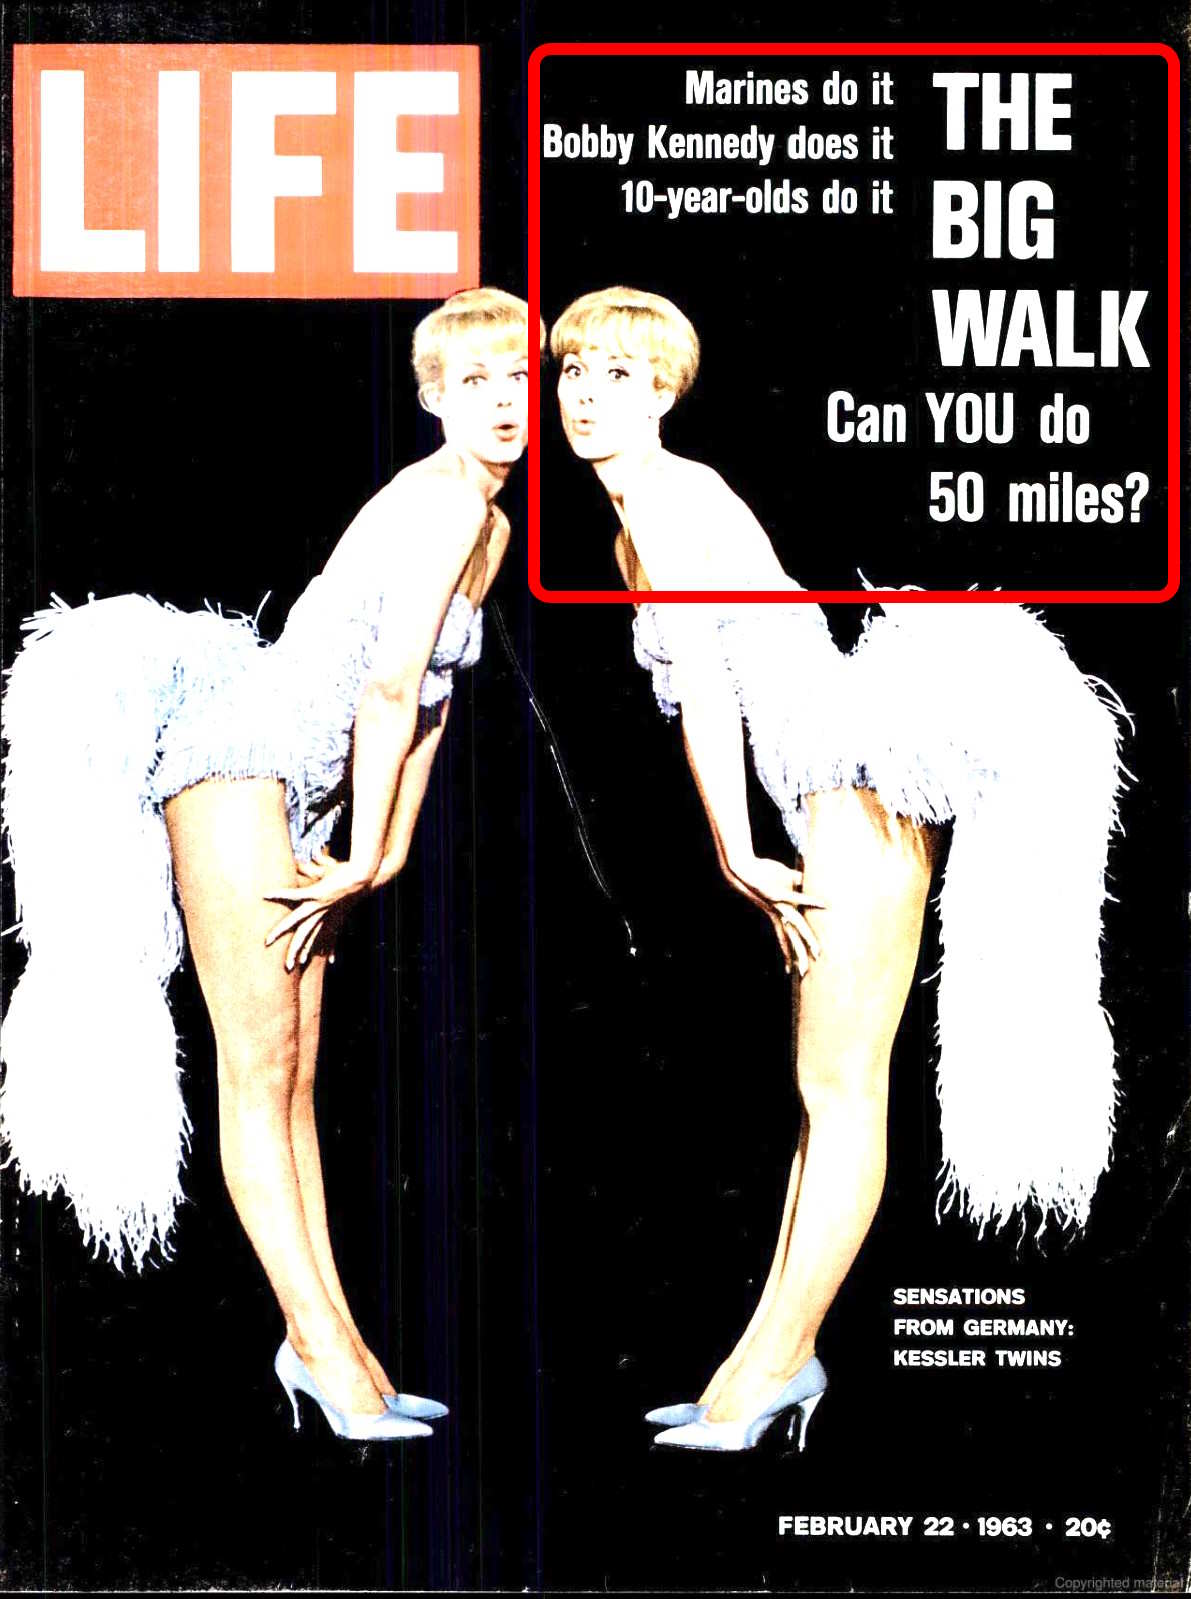 Life magazine 2/22/1963 cover featuring "The Big Walk" article